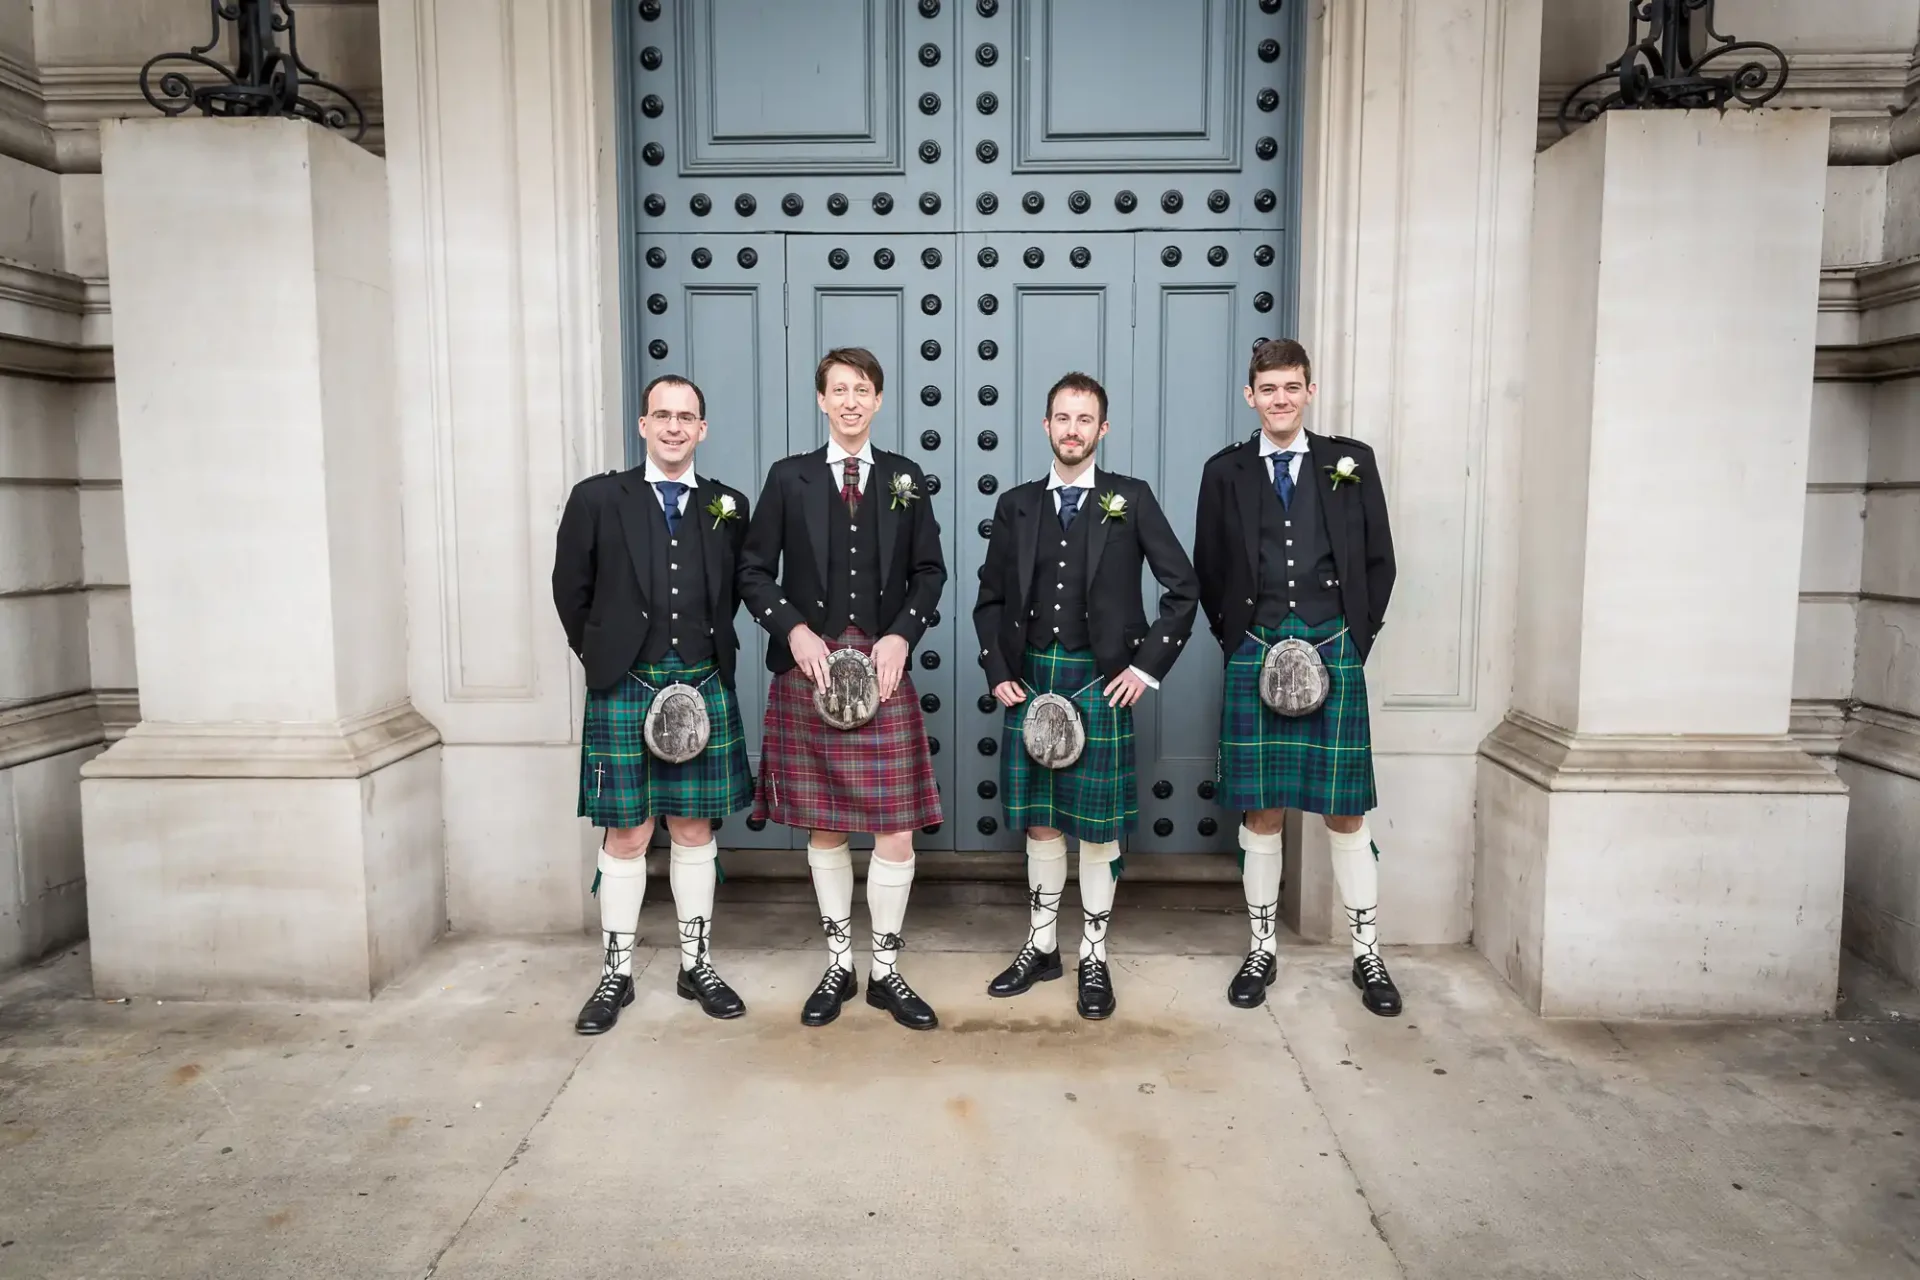 Four men in traditional scottish attire with kilts standing in front of an ornate building with blue doors.